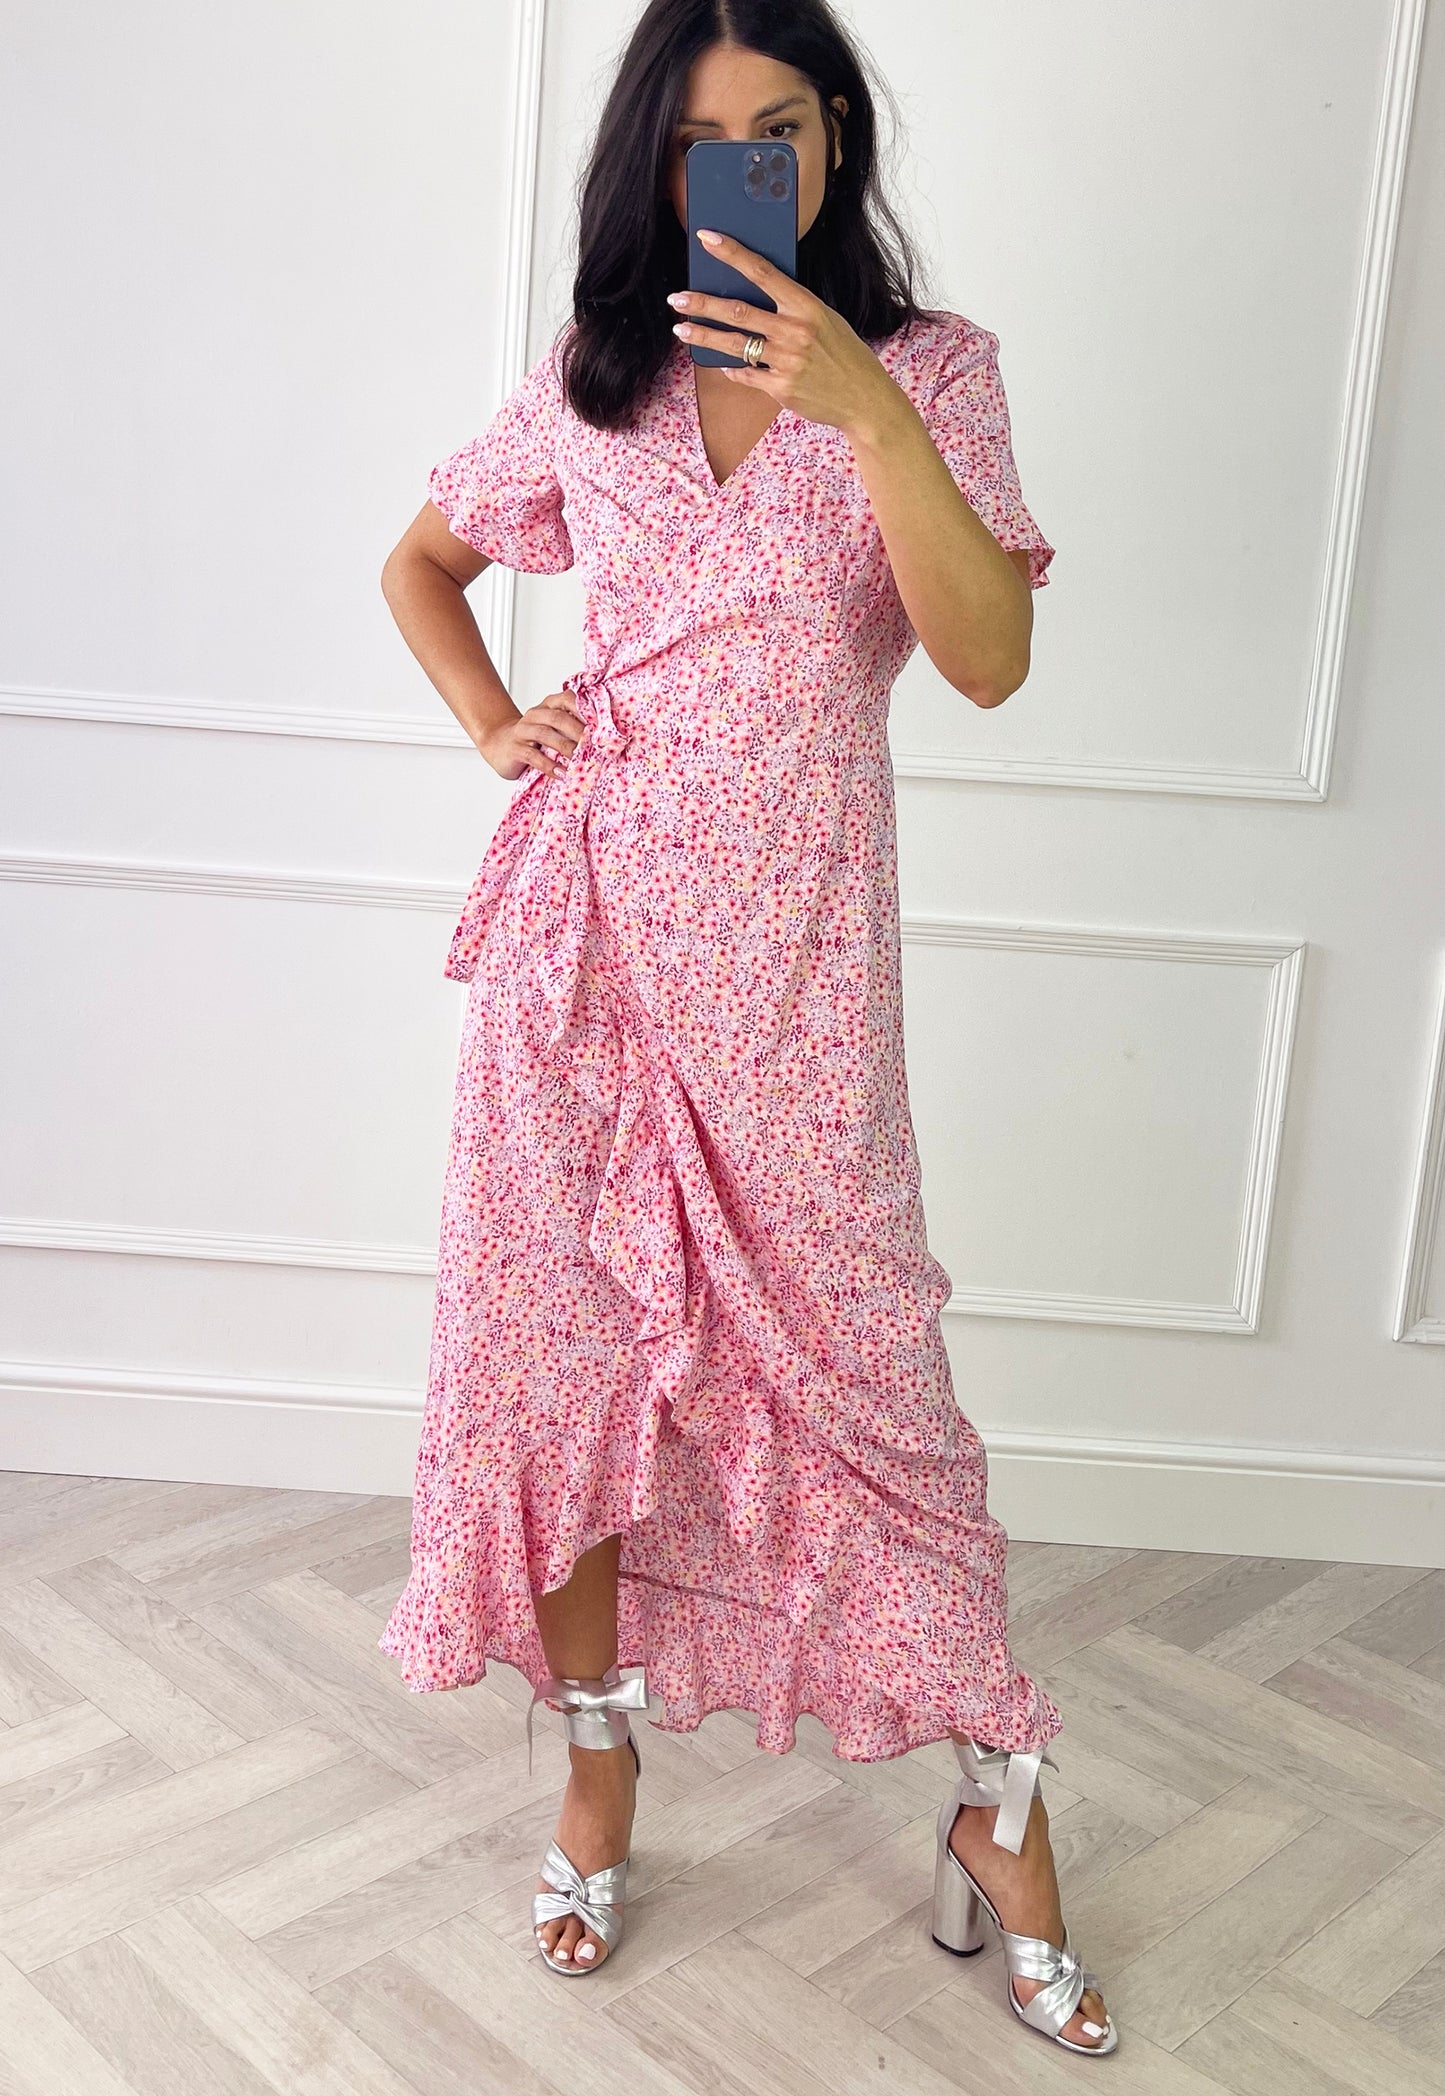 VERO MODA Henna Ditsy Floral Print Maxi Frill Wrap Dress in Pink - One Nation Clothing